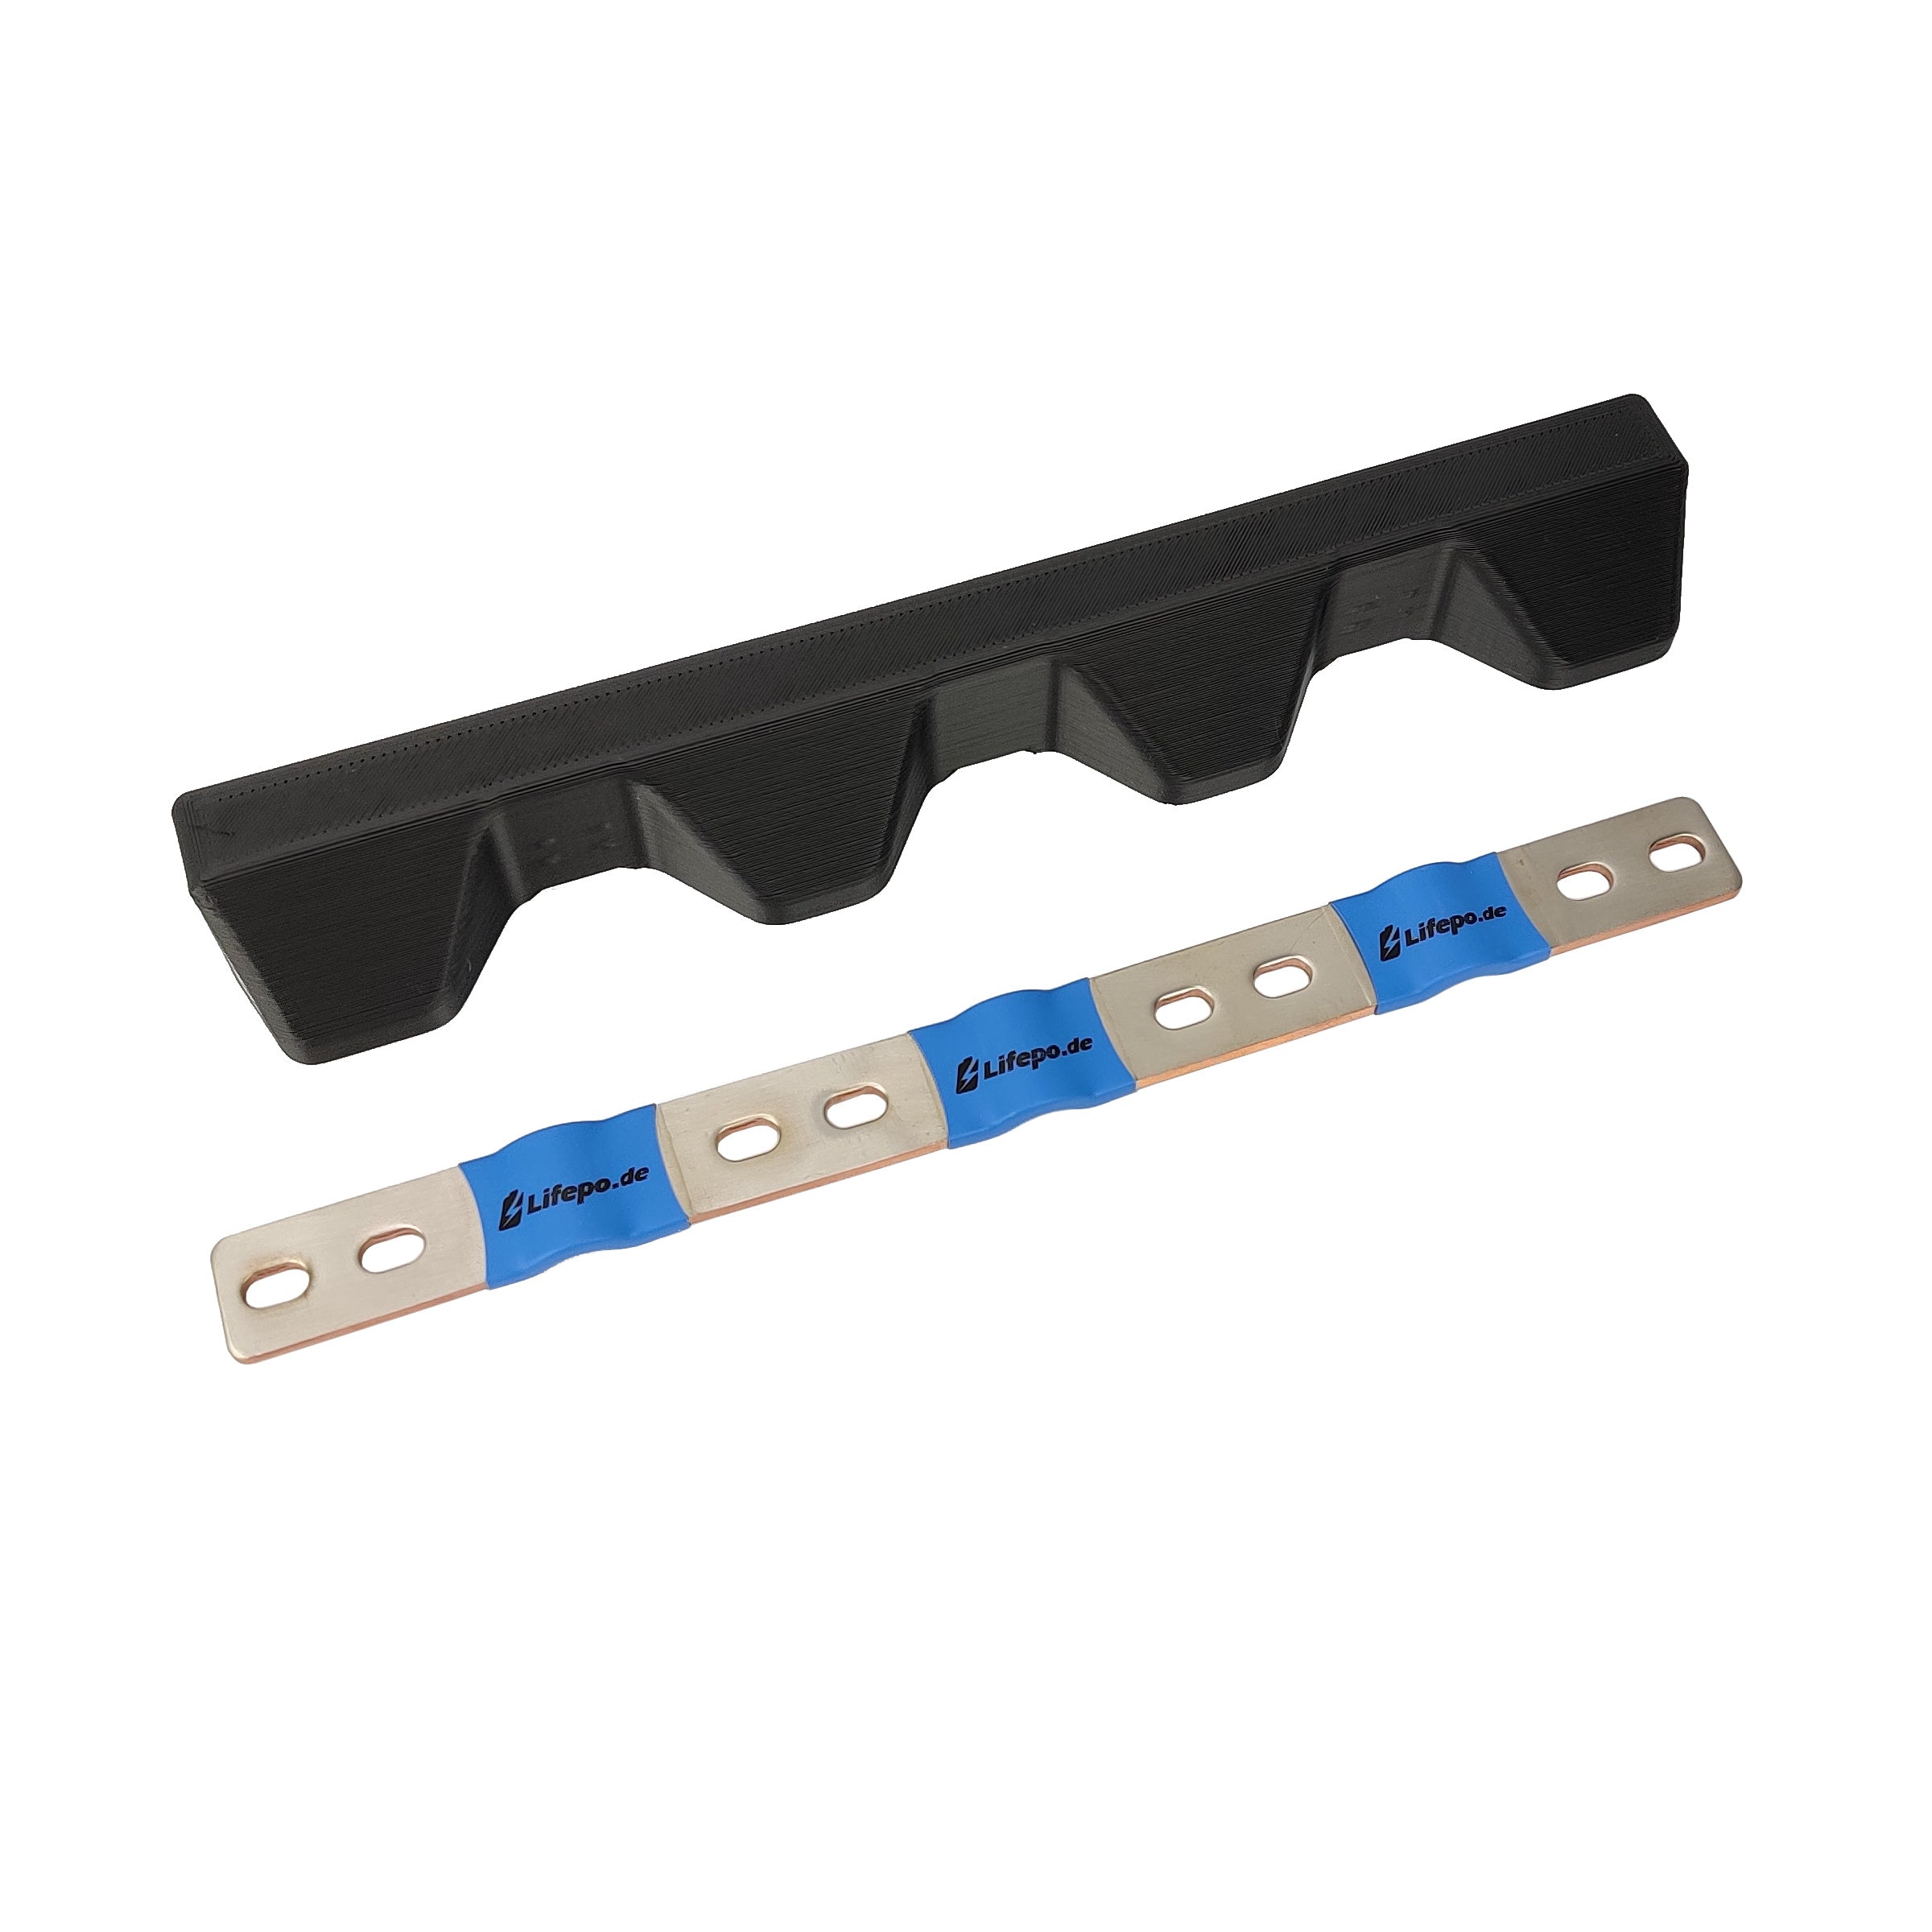 0% VAT Copper connector parallel connection 4x 72mm with the finest flexible copper levels